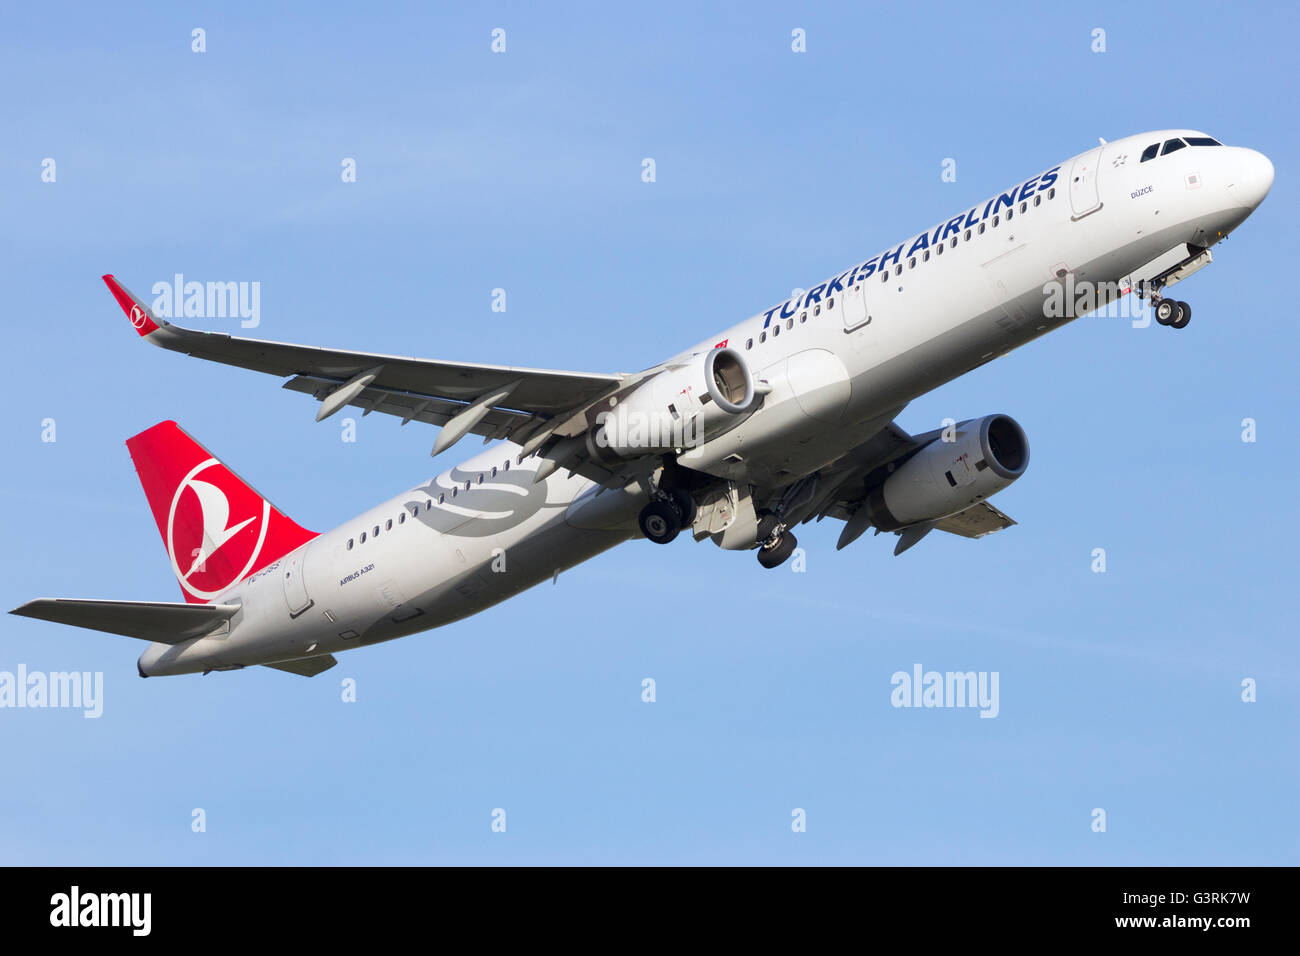 Turkish Airlines Airbus A321 take-off from Schiphol airport Stock Photo -  Alamy